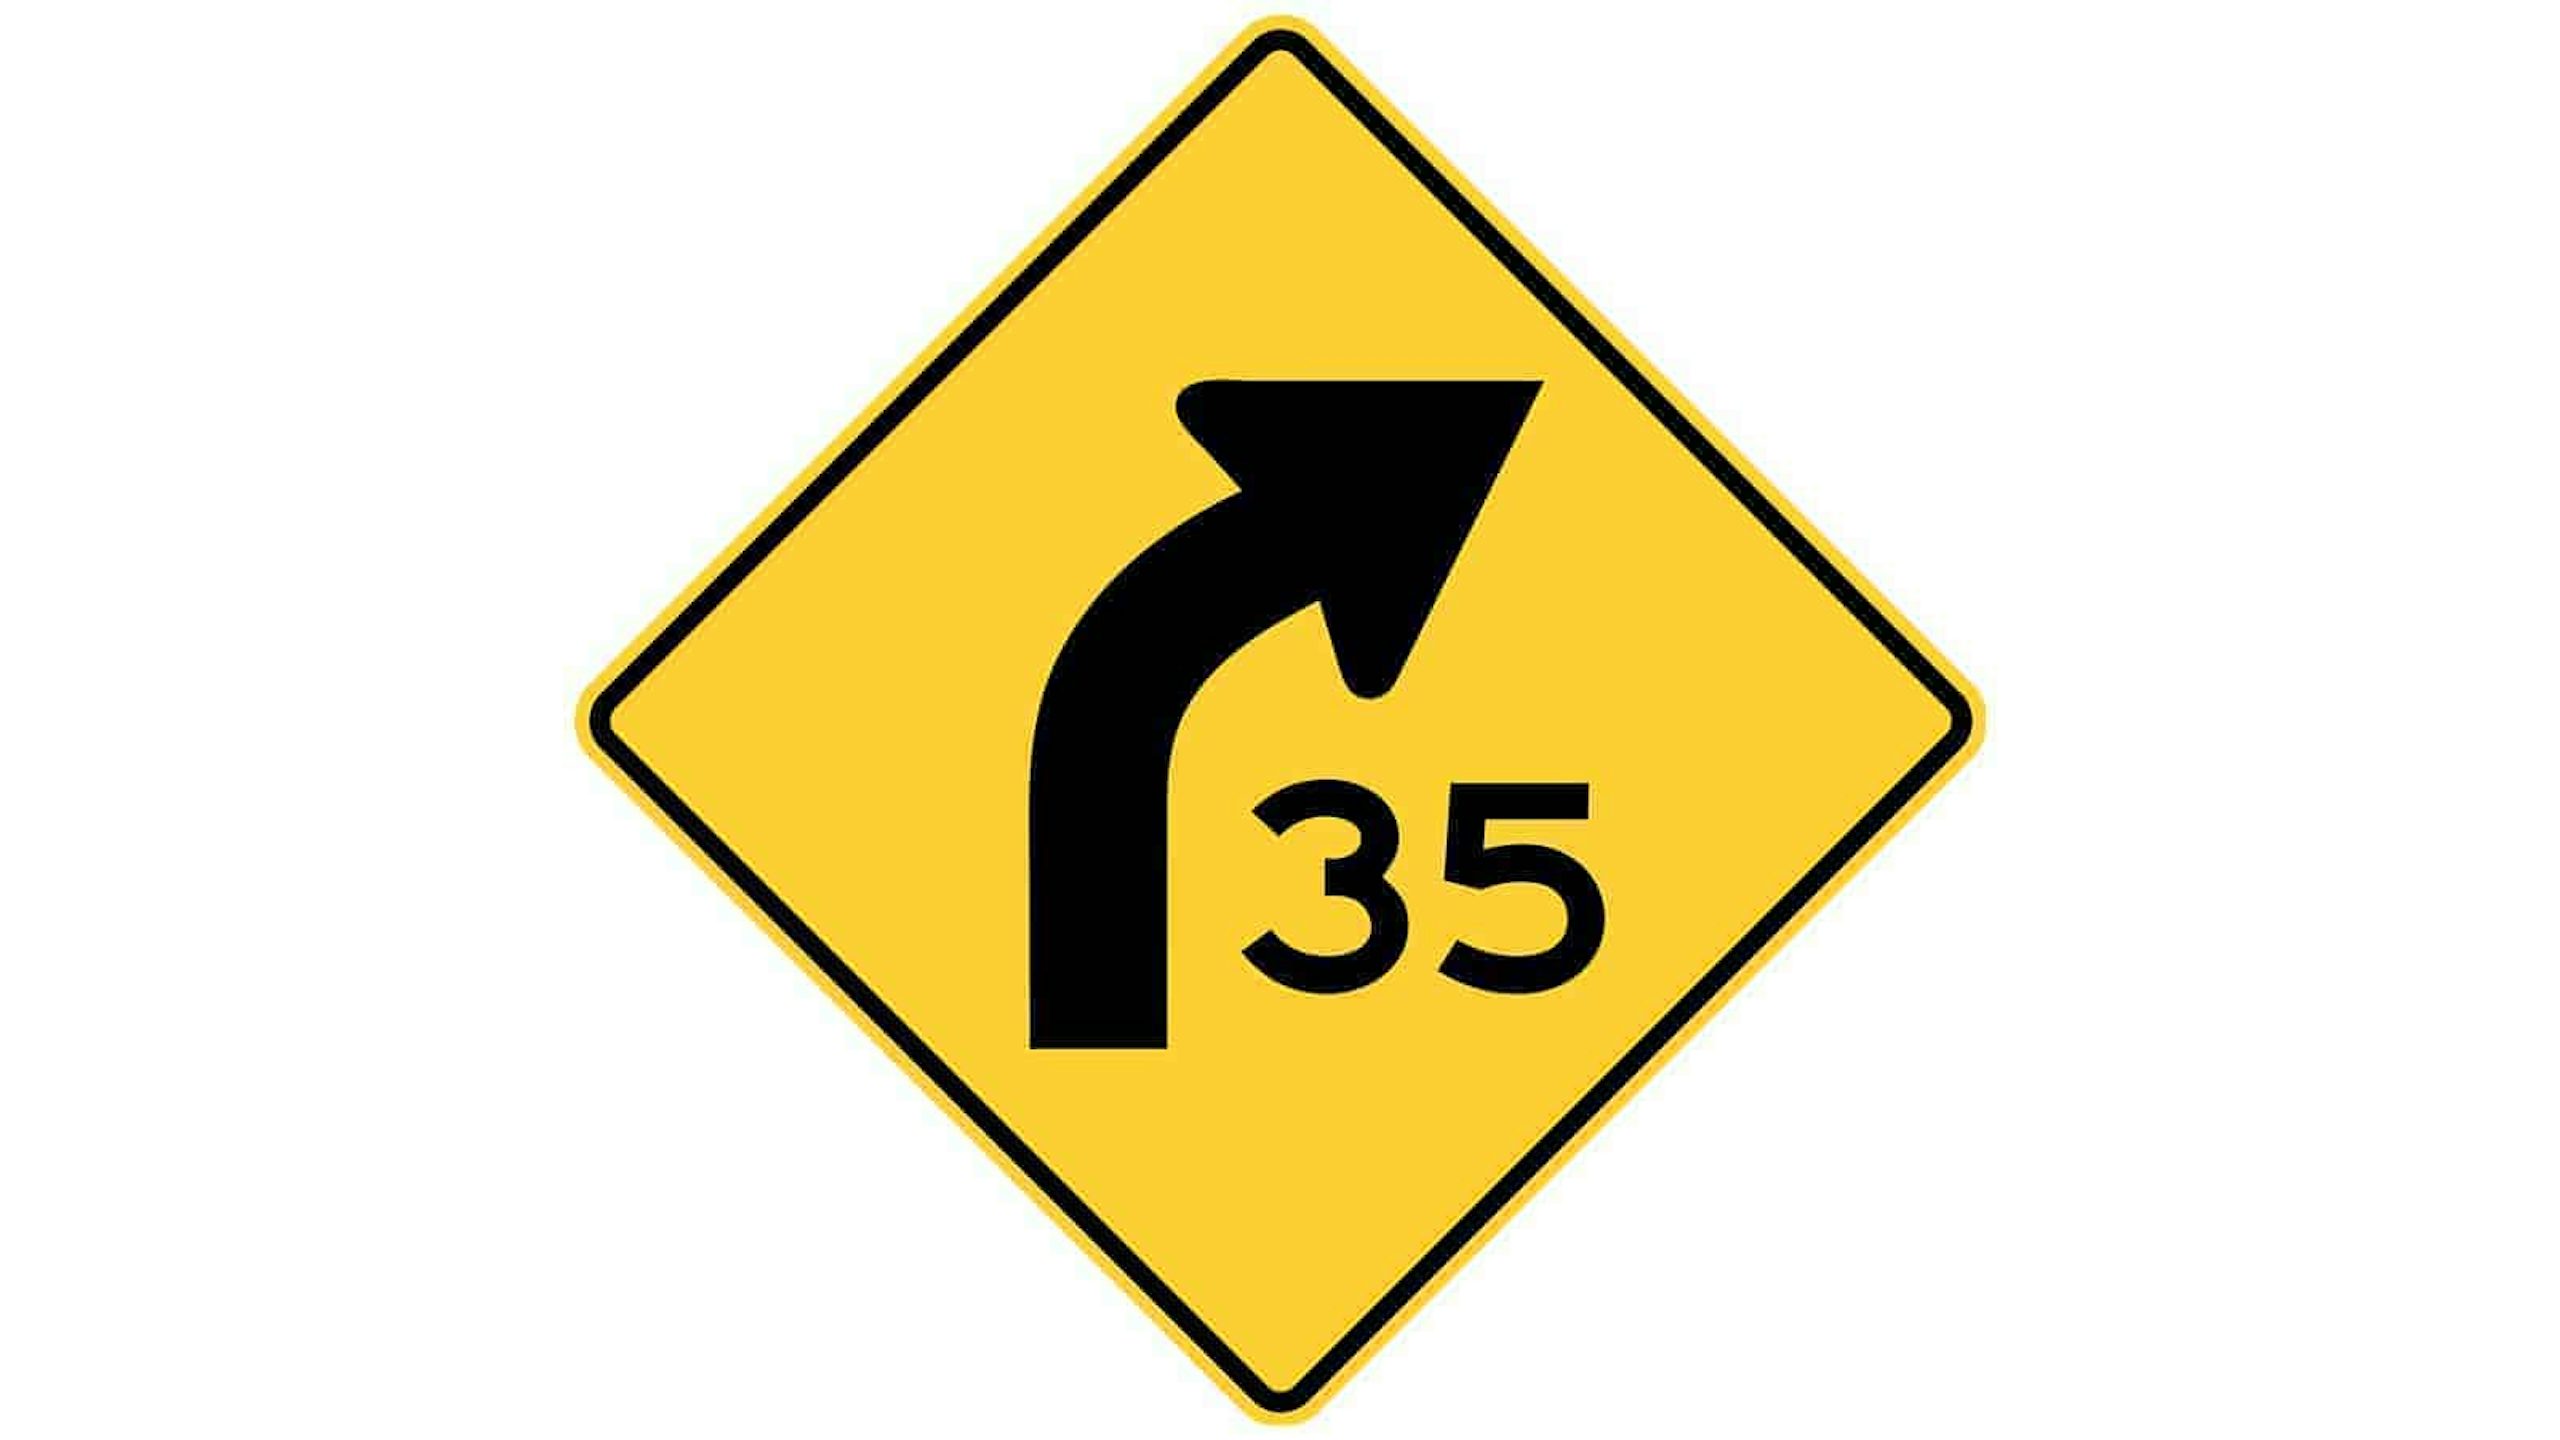 Warning sign curve to the right with advisory speed